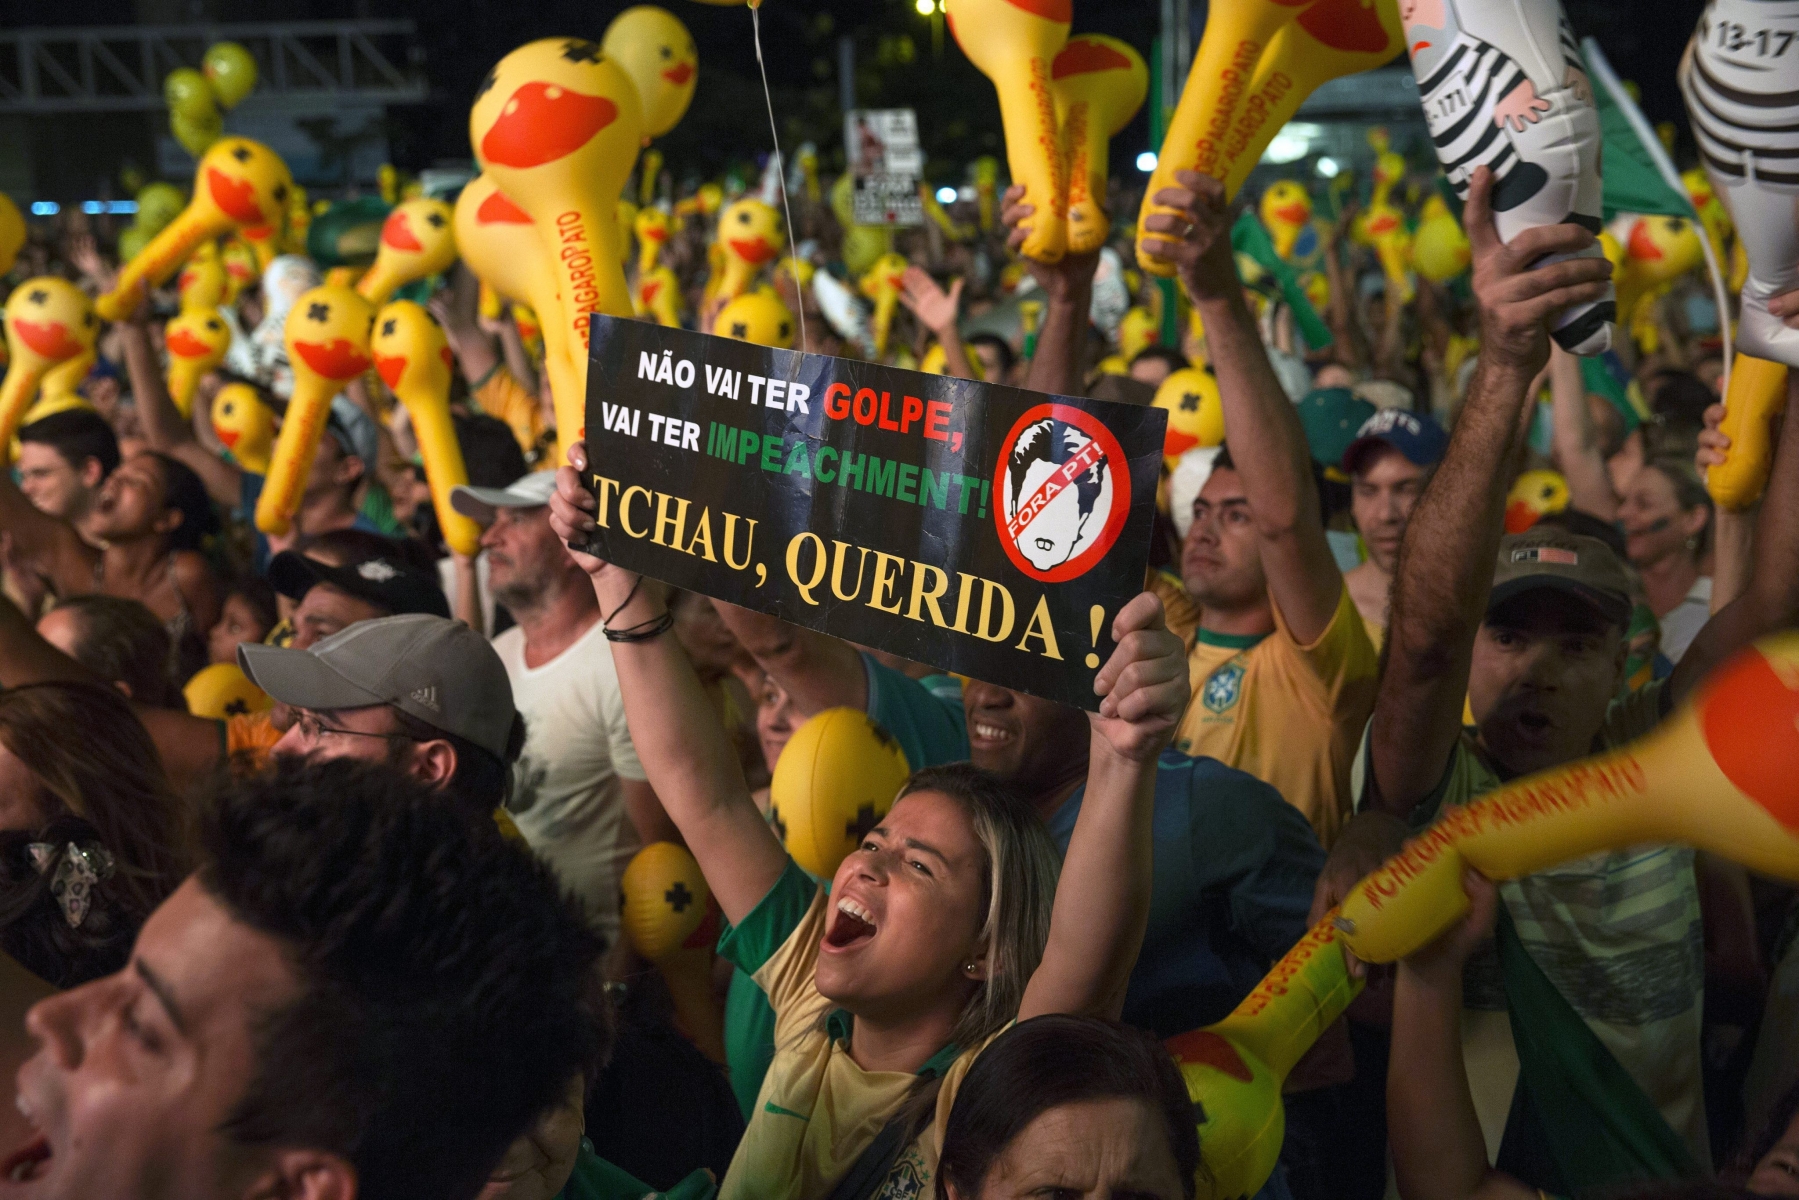 epa05264836 Hundreds of people watch a screen displaying the Chamber of Deputies's discussion, at Paulista Avenue in Sao Paulo, Brazil, 17 April 2016. Banner reading 'You will have not a golpe. You will be impeached. Goodbye Dear!' Thousands of people took to the streets of several Brazilian cities as the Chamber of Deputies started voting to decide if the Senate should take up the process of impeaching President Dilma Rousseff. Should the lower house vote in favor of the impeachment process, the Senate will have the last word on the eventual opening of the political trial. Of the 27 political parties represented in the lower house, only seven have spoken in favor of the president and cast their vote against an eventual impeachment trial.  EPA/SEBASTIAO MOREIRA BRAZIL CRISIS